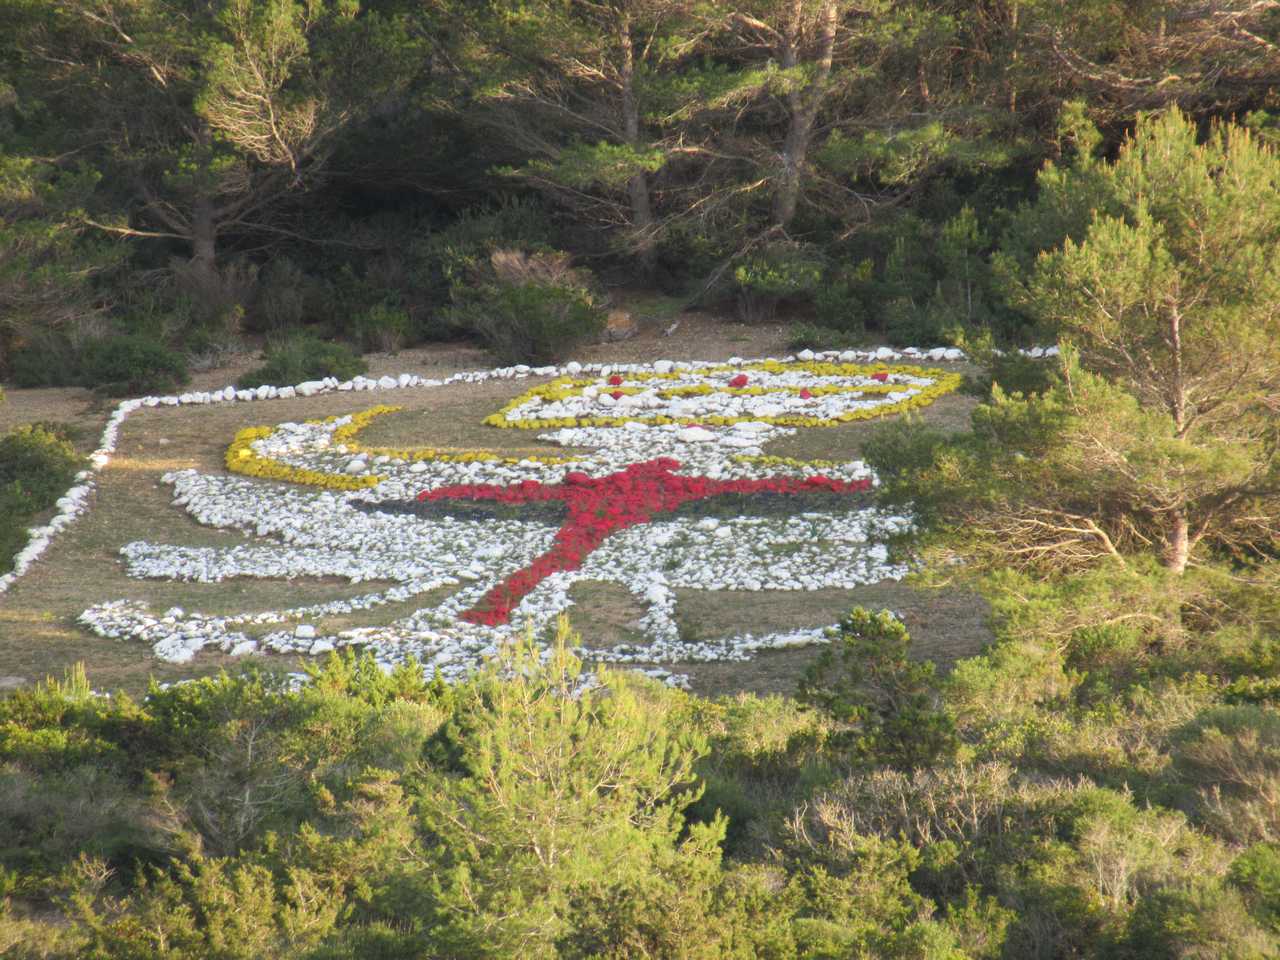 The hillsides are decorated by the military.